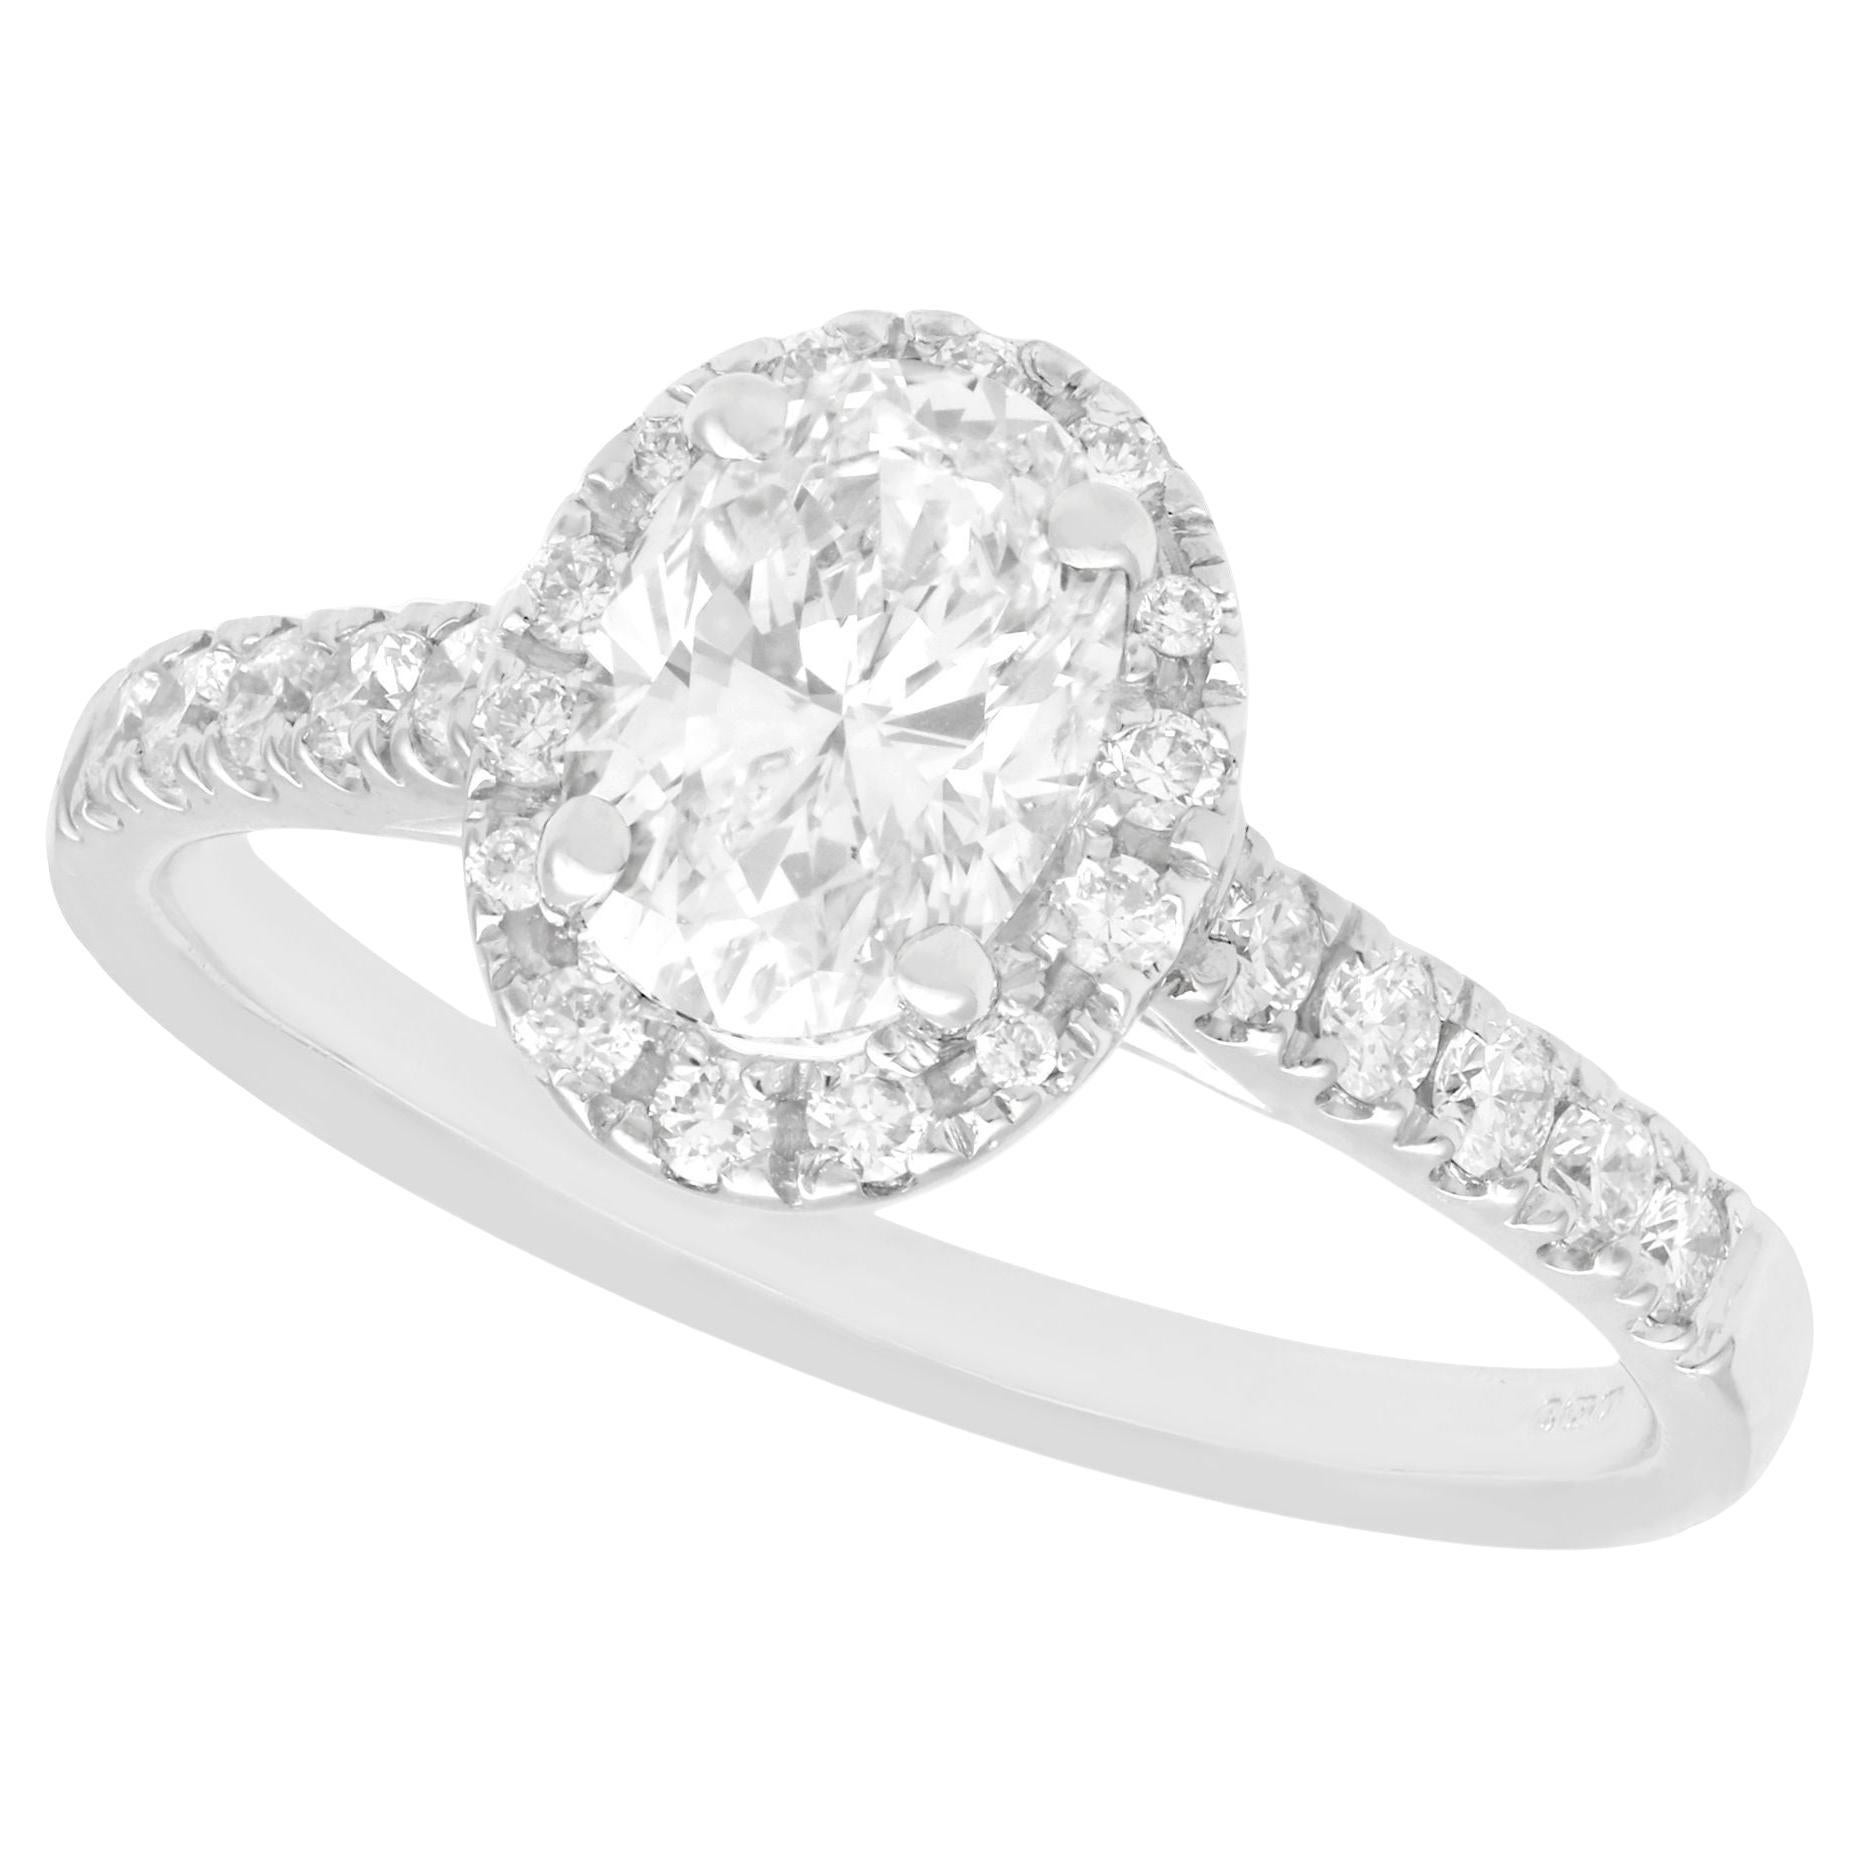 1.42 Carat Oval Cut Diamond and White Gold Engagement Ring For Sale